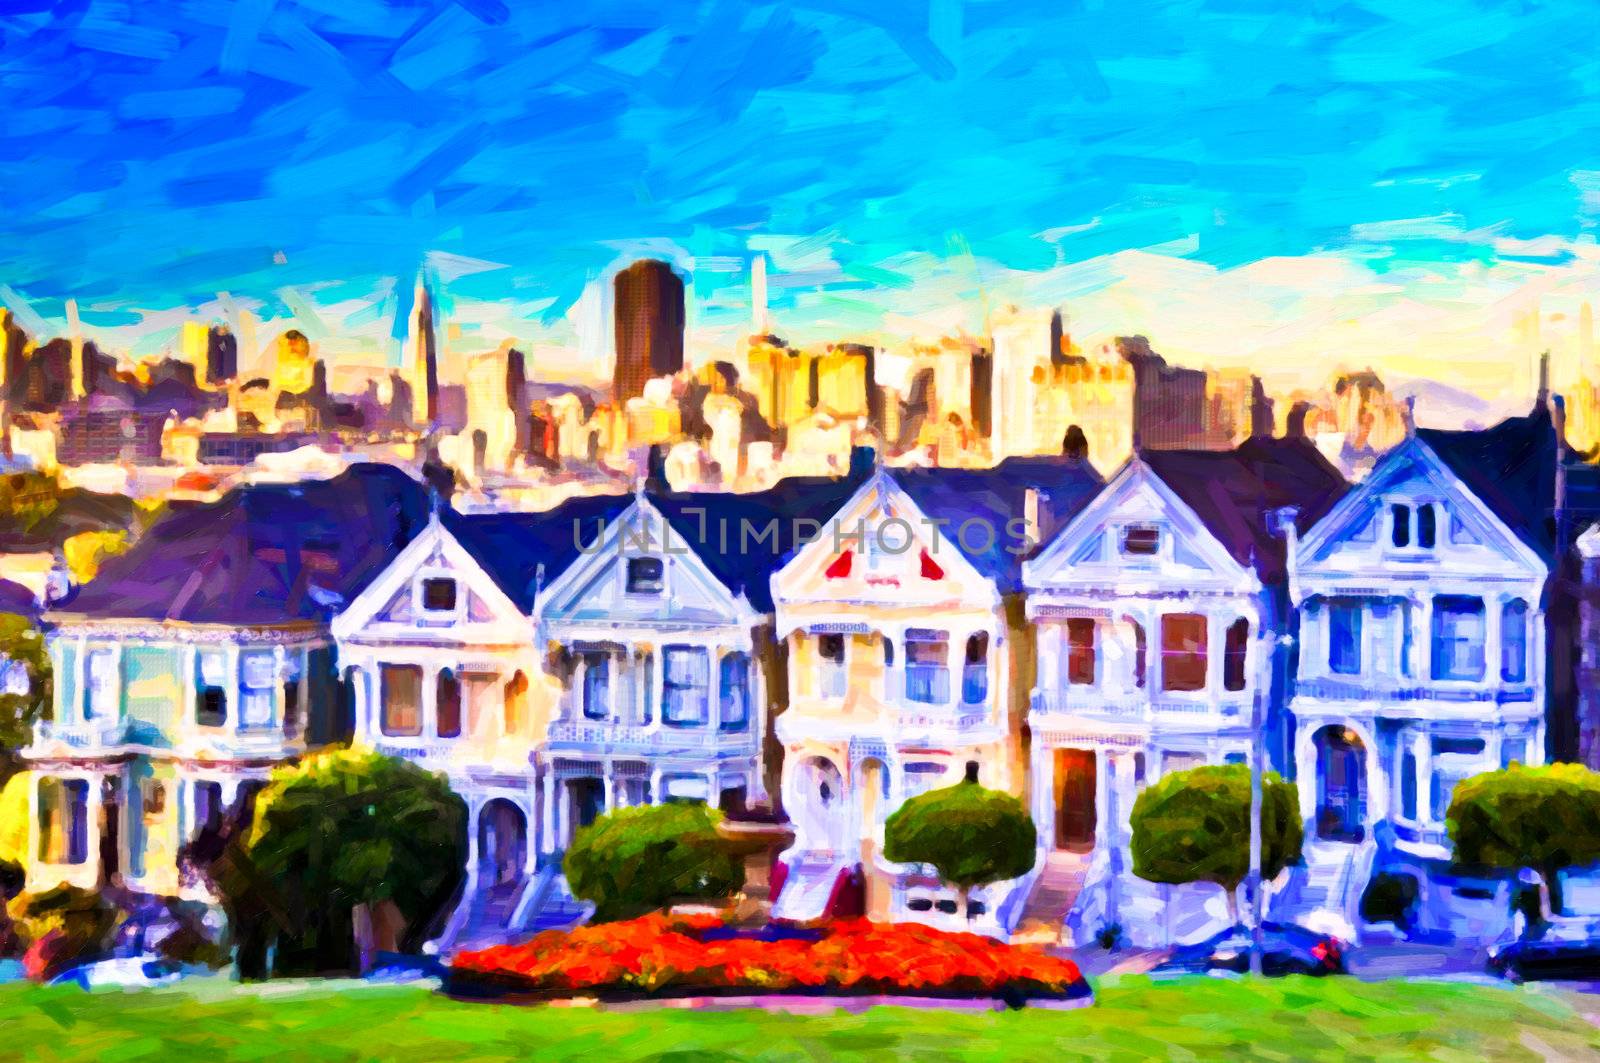 Victorian houses in SF, post process painting art by martinm303